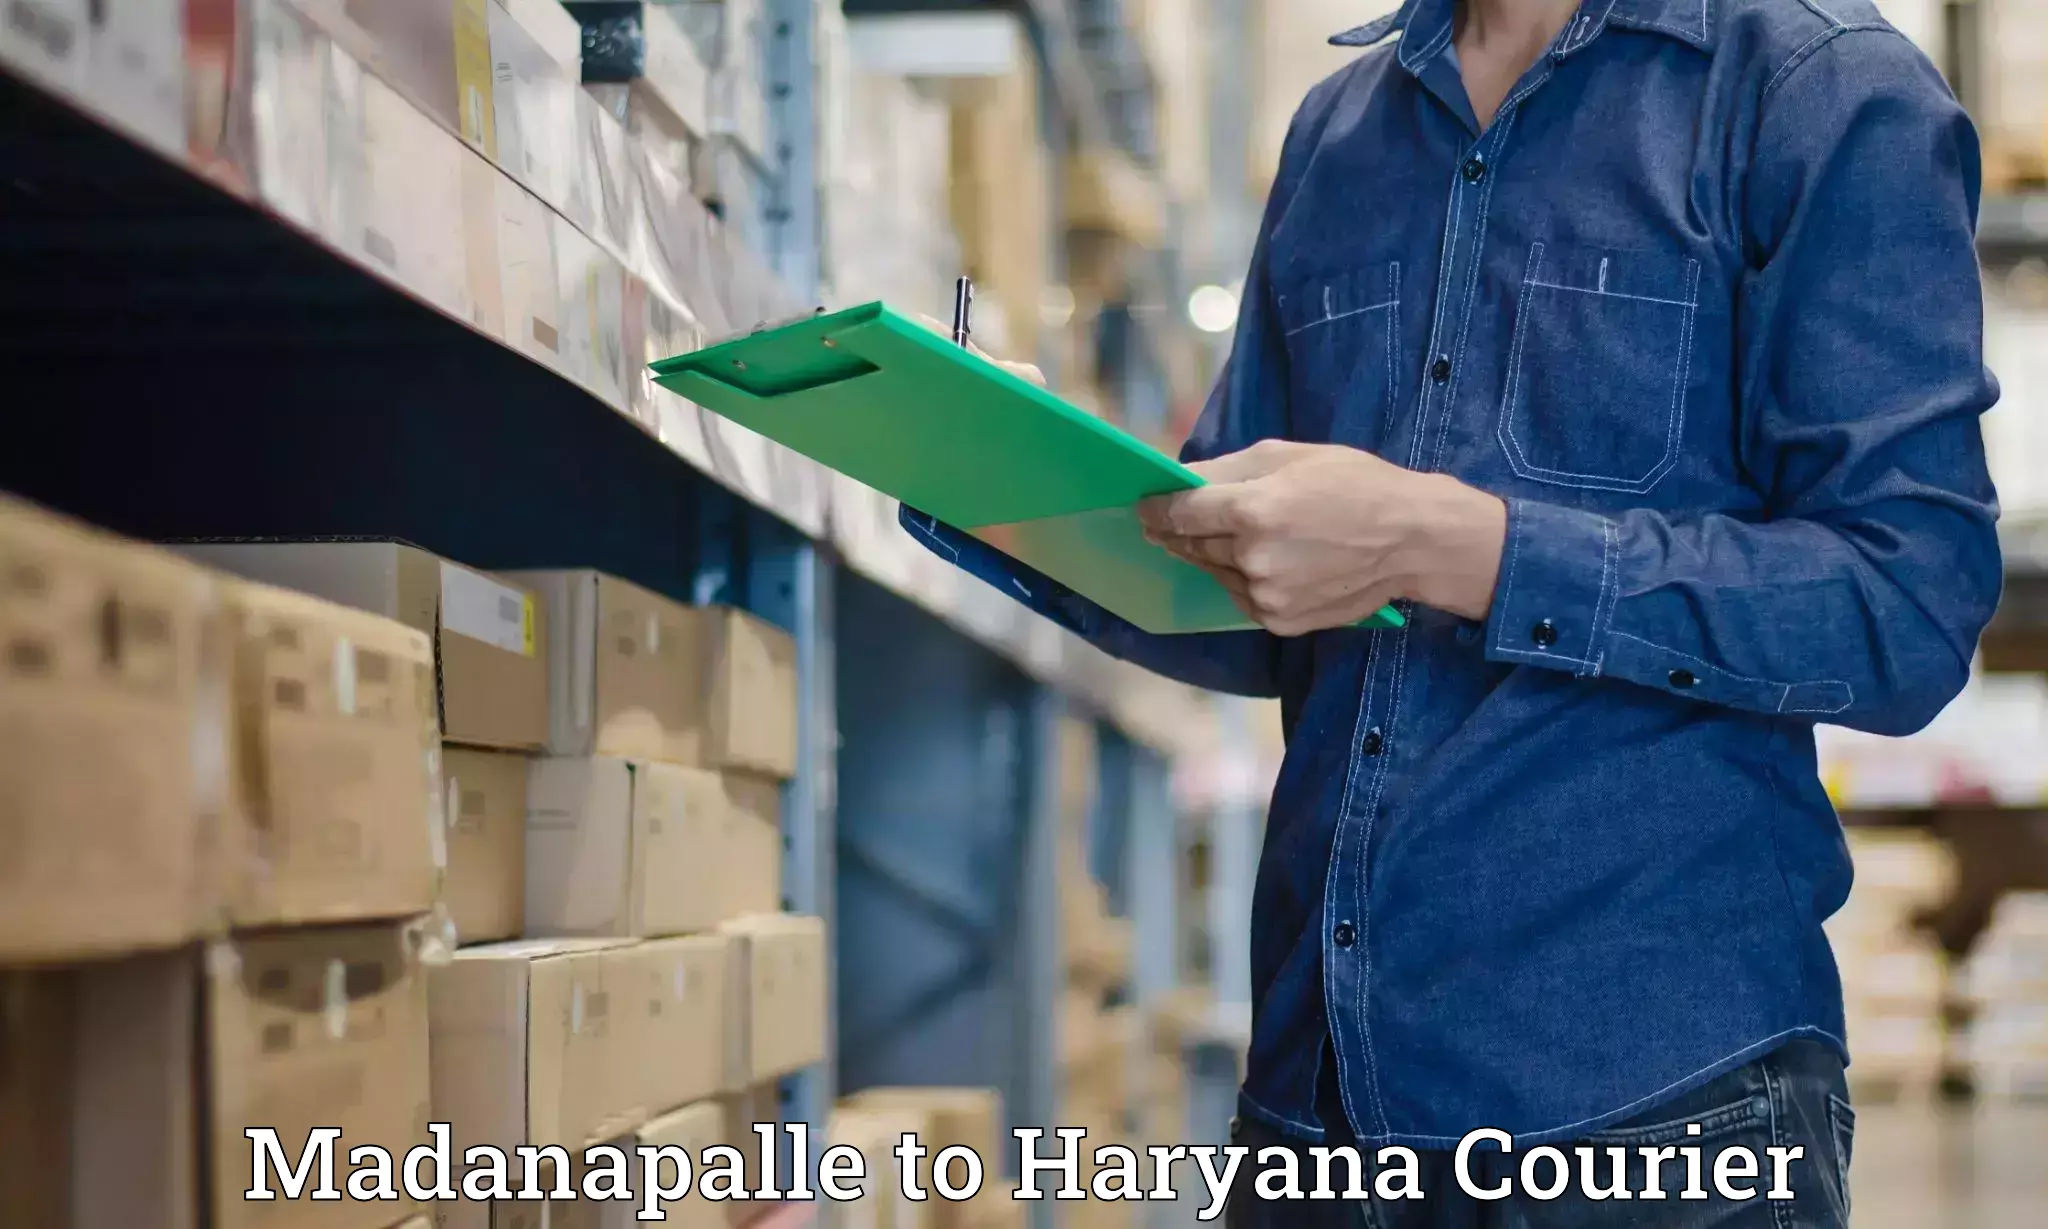 Courier services Madanapalle to NCR Haryana